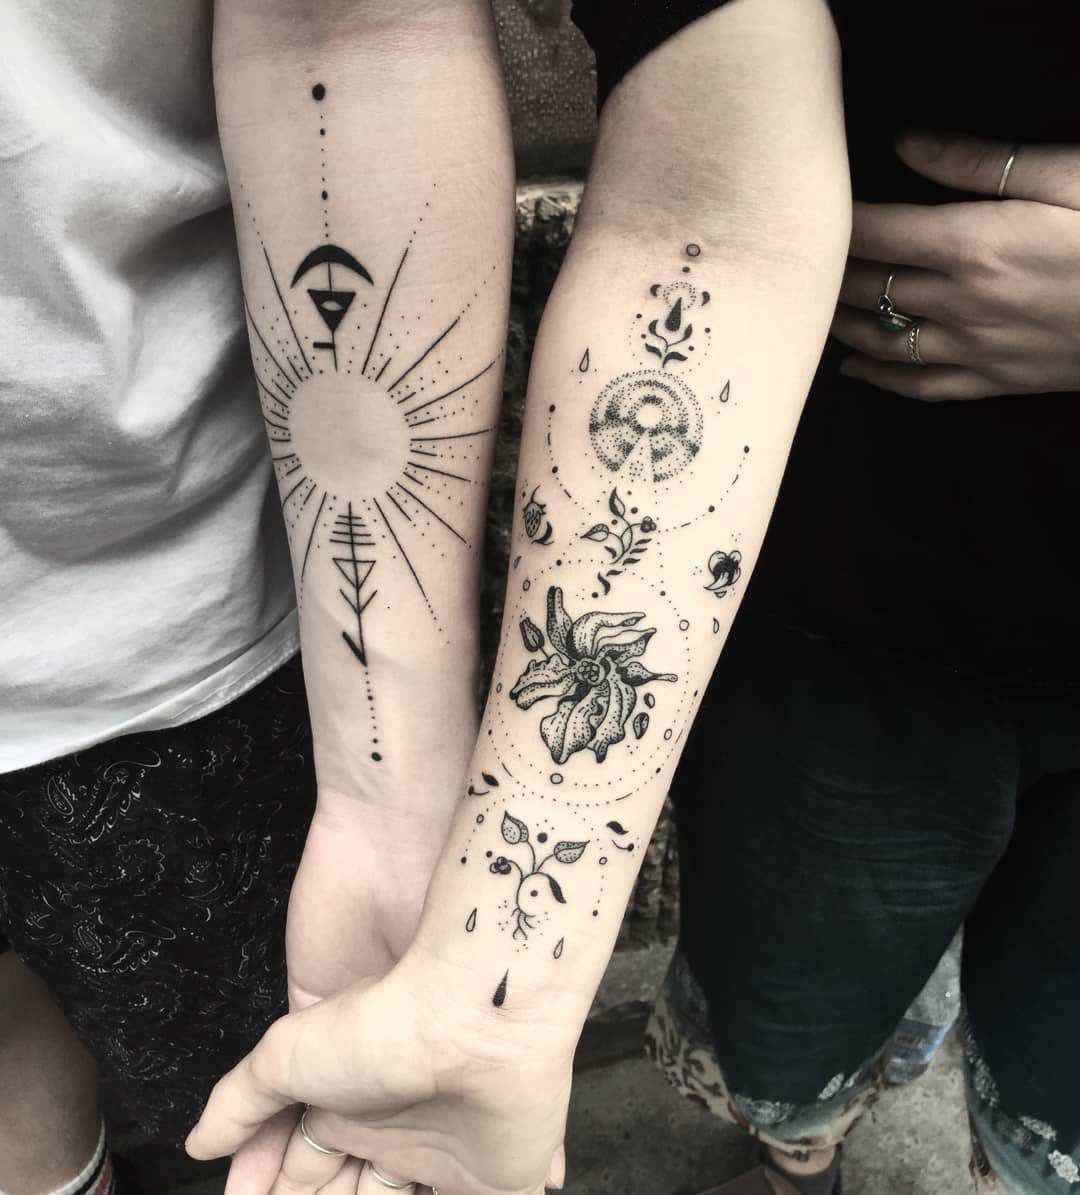 Some couples tattoos I did today Thanks for looking ! #couplestattoo  #freathertattoo #anchortattoo #nautical #nauticaltattoo #staugusti... |  Instagram